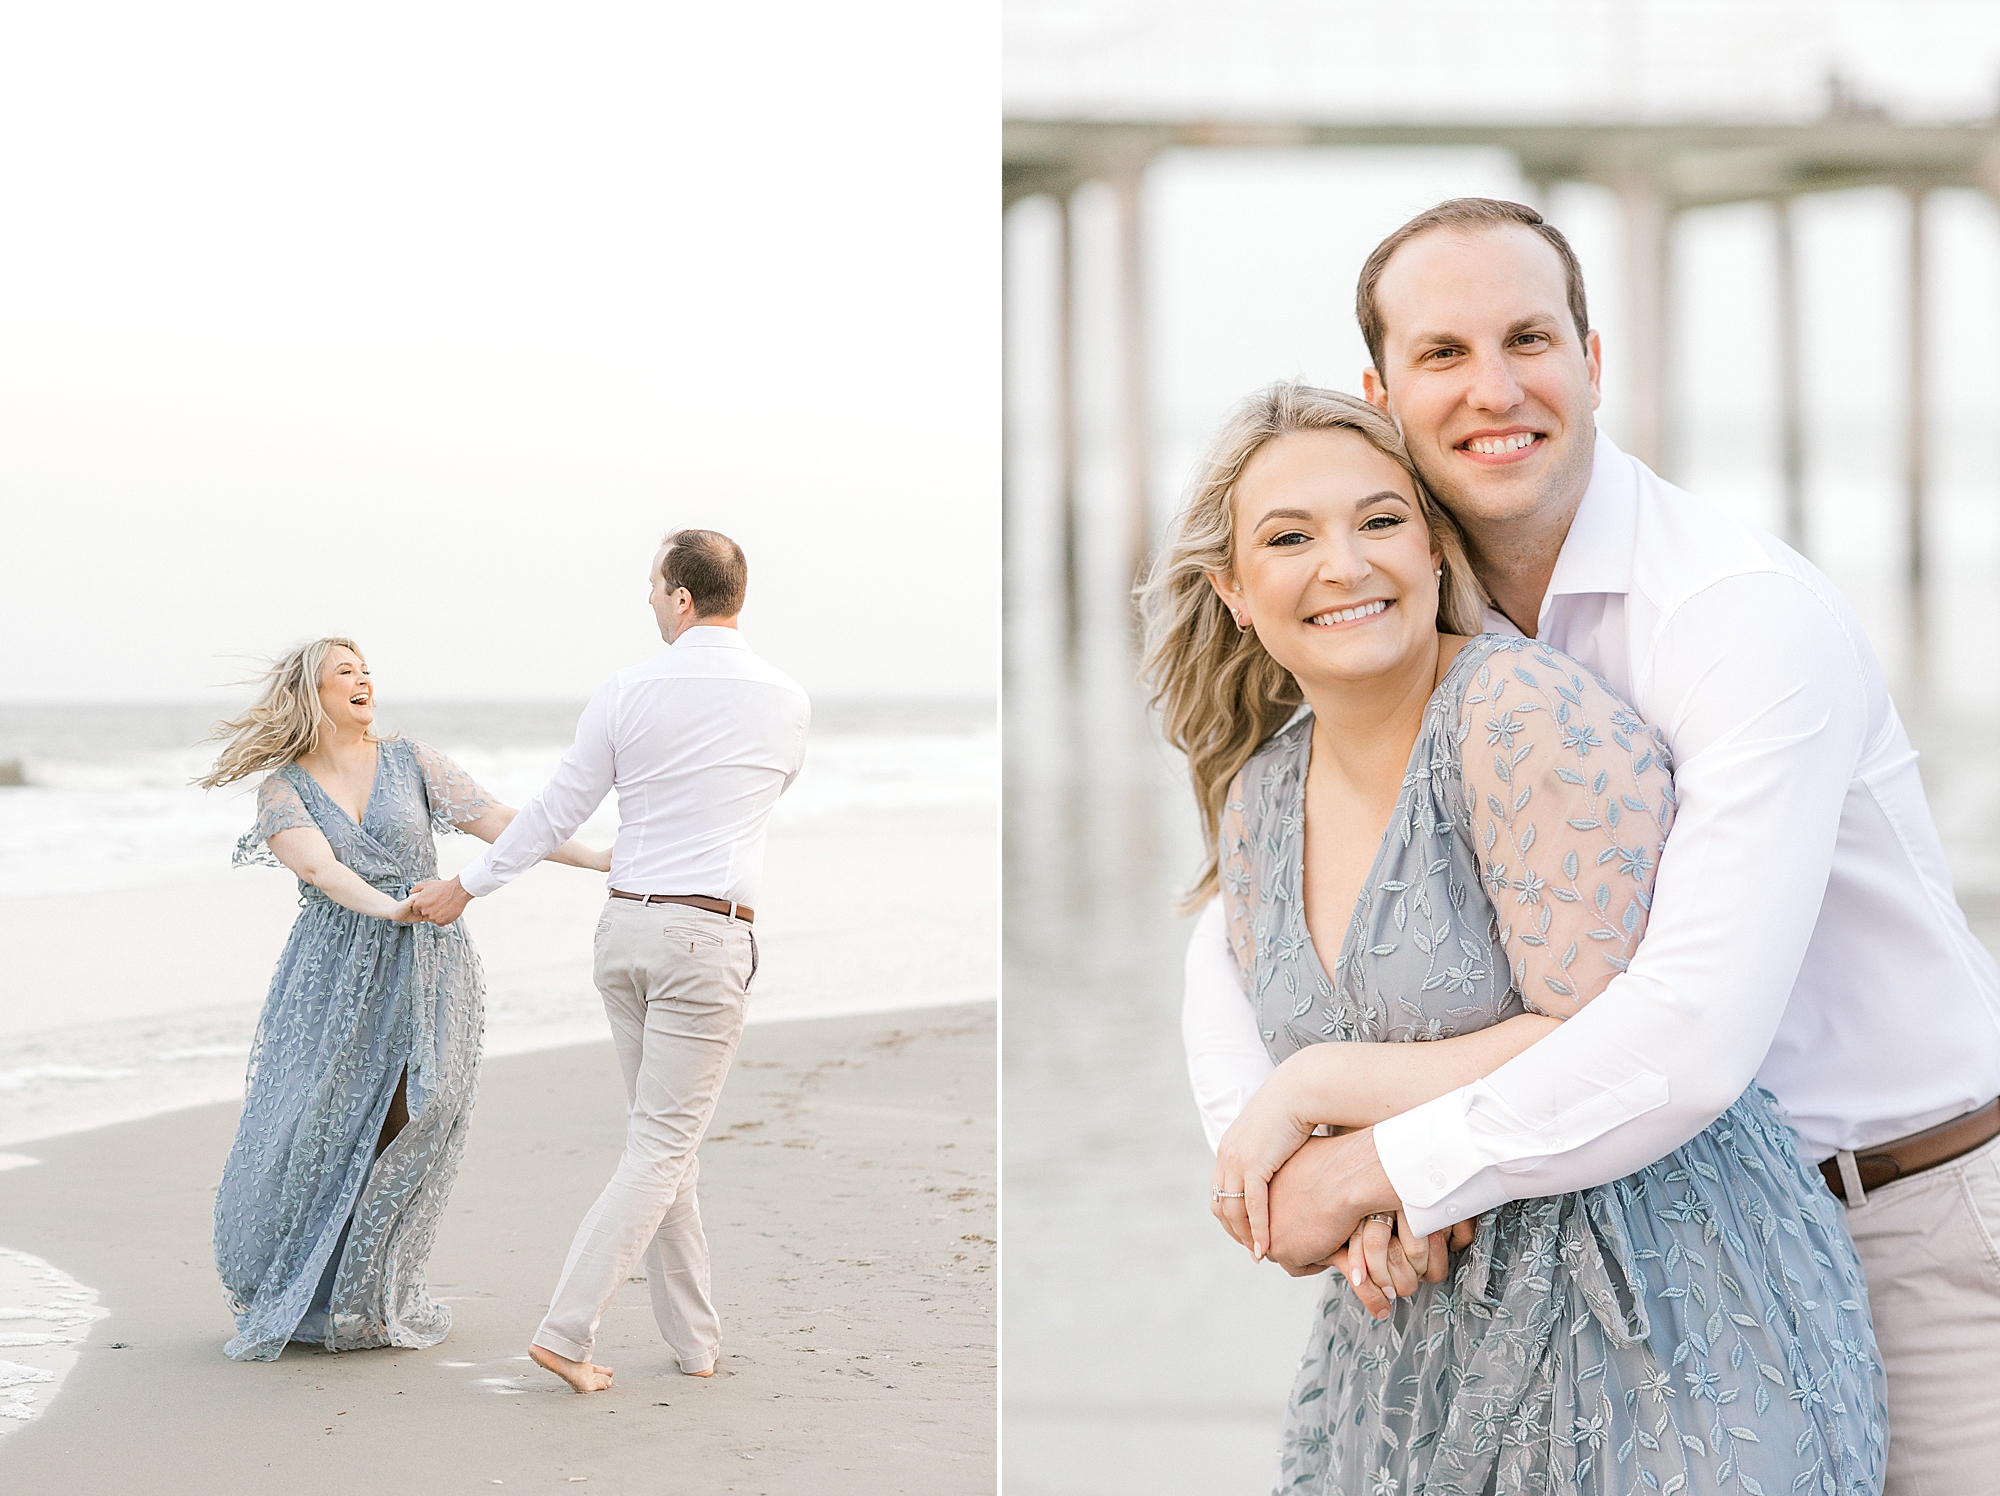 man hugs woman in blue lace dress from behind on beach in New Jersey